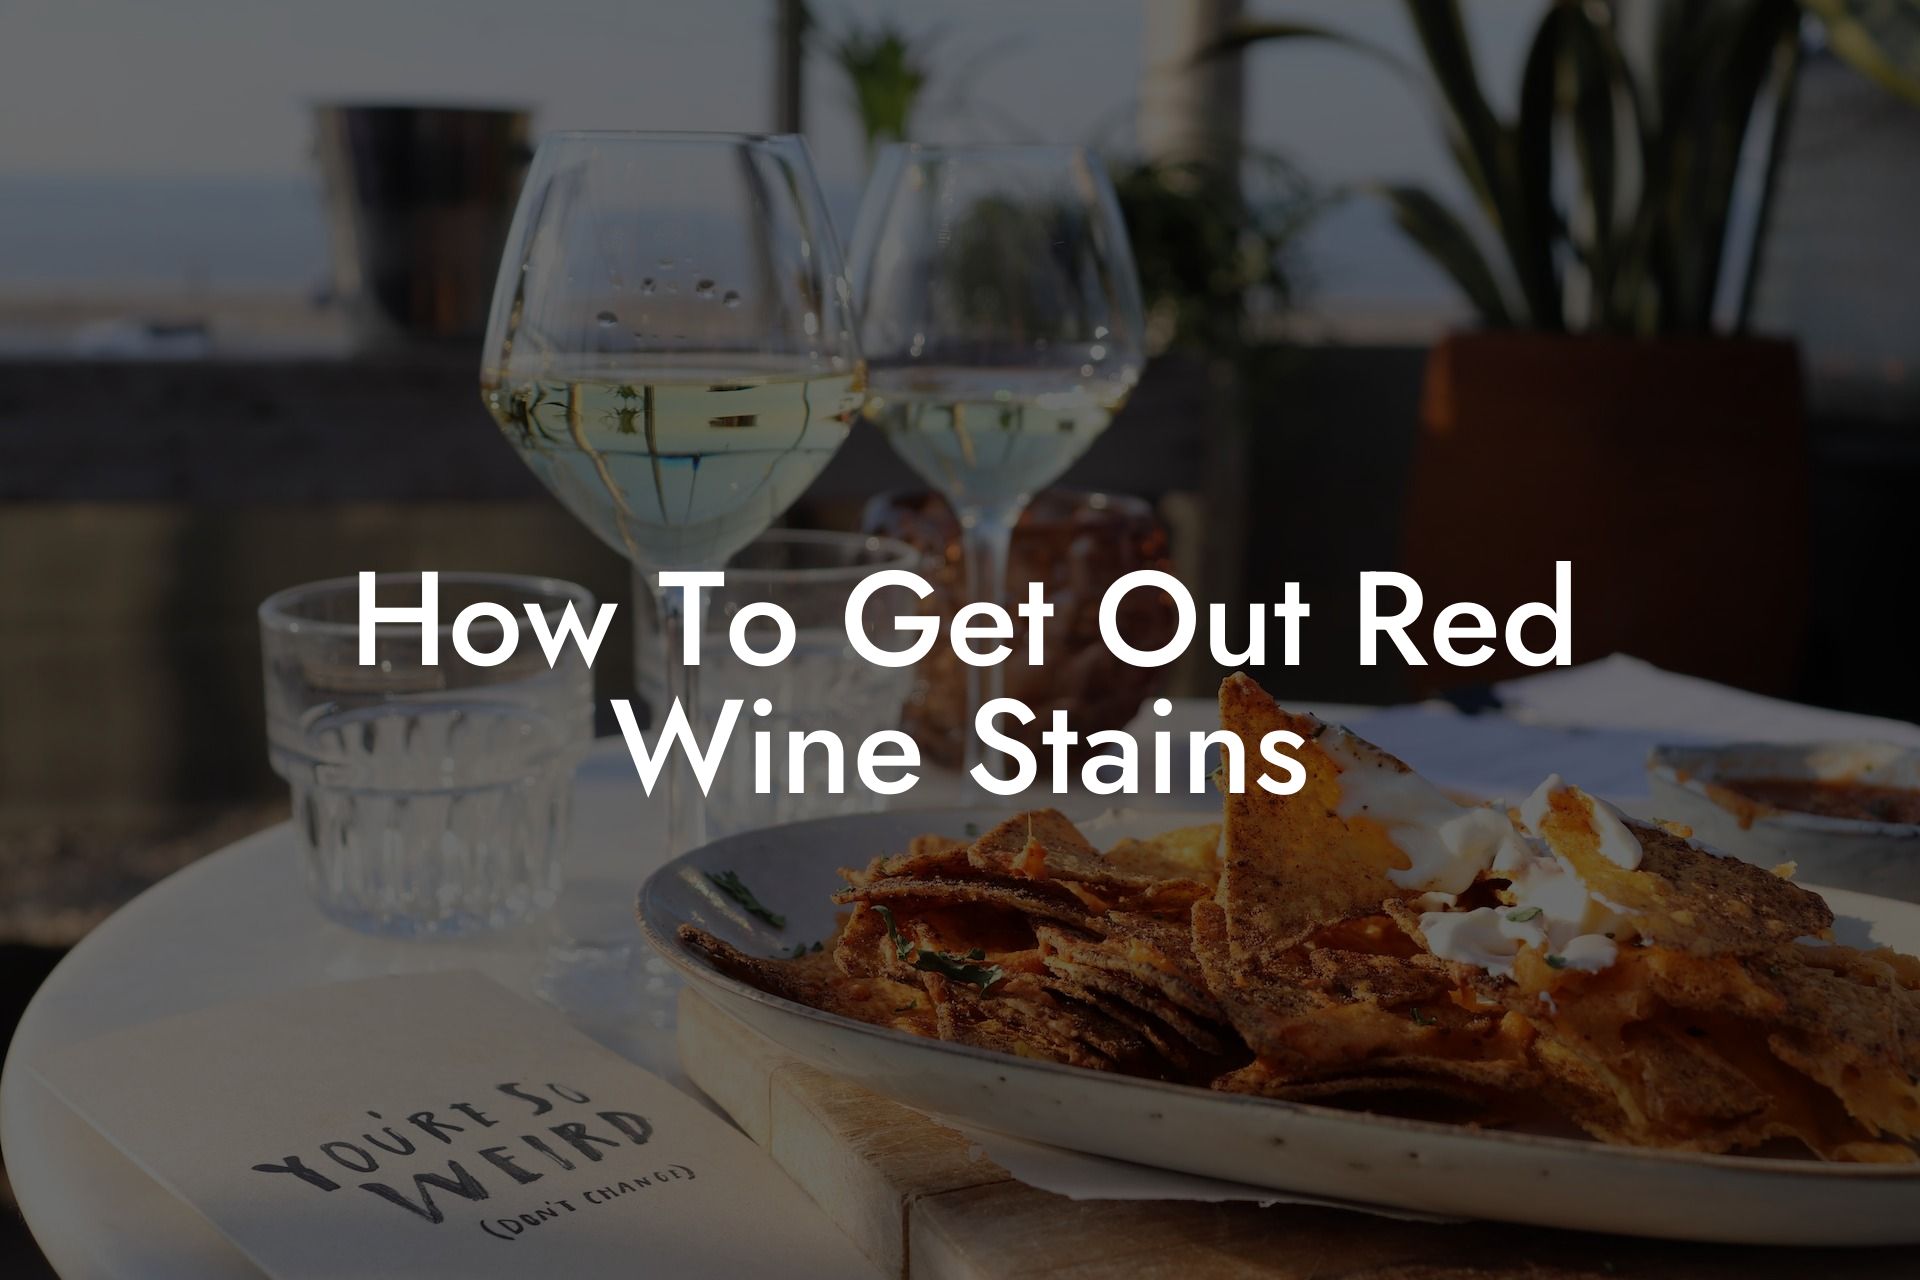 How To Get Out Red Wine Stains